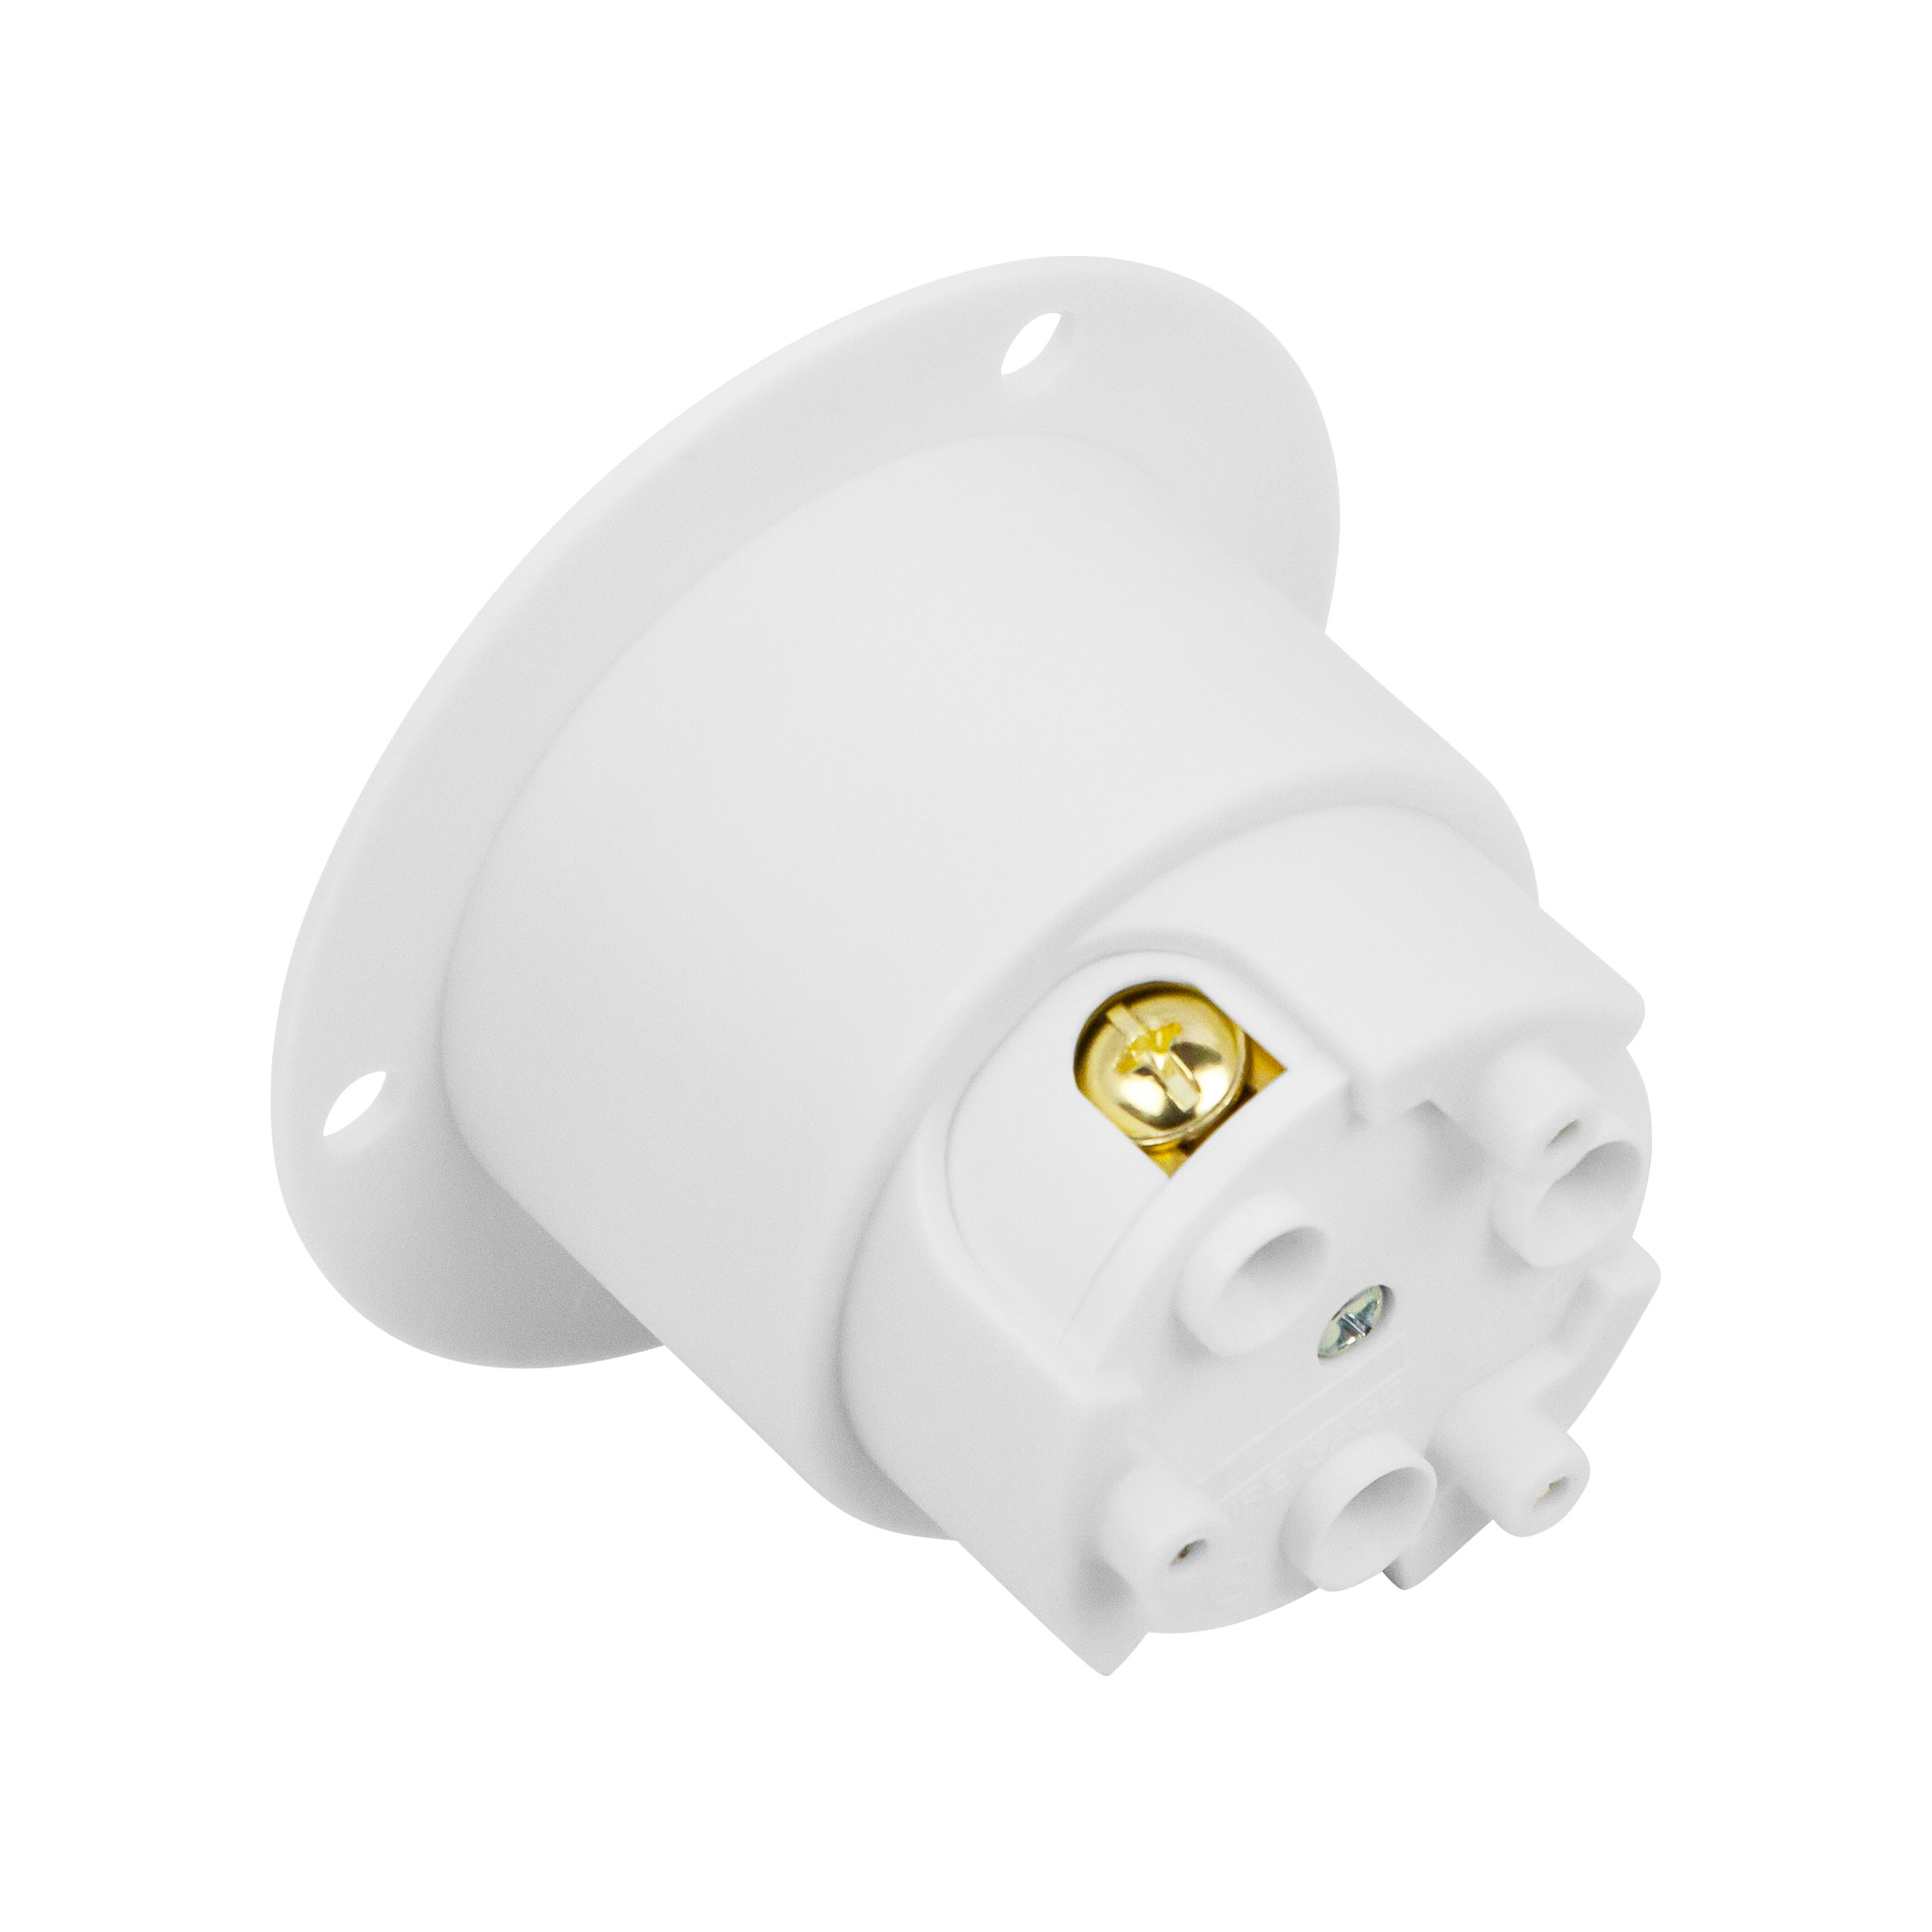 NEMA L6-30 Flanged Outlet Locking Plug Charger Receptacle 30 Amp White